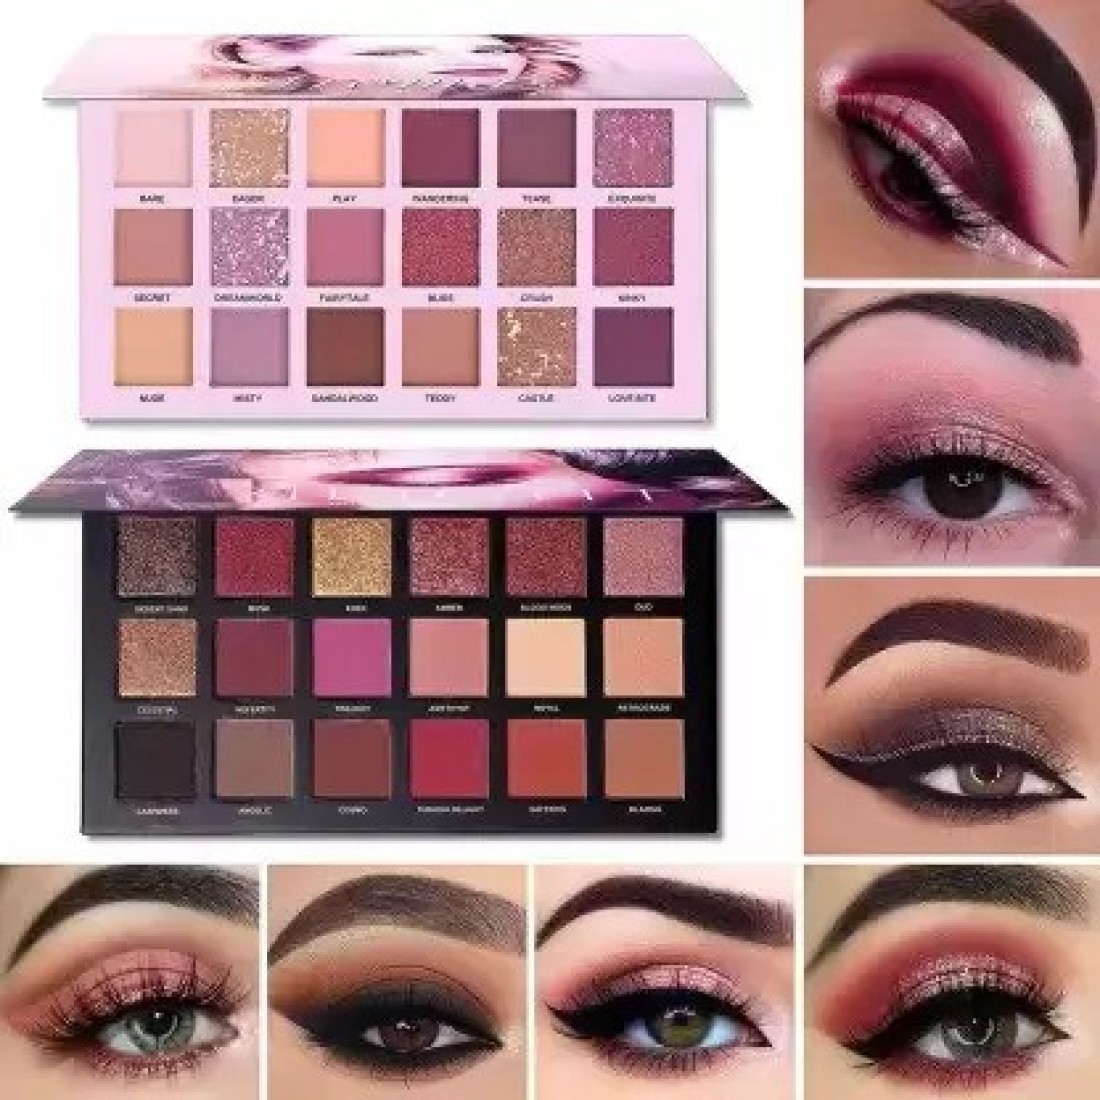 popxmart Nude Eye Shadow Palette and Rose Gold Eyeshadow 36 g (Multicolour) 36  g - Price in India, Buy popxmart Nude Eye Shadow Palette and Rose Gold  Eyeshadow 36 g (Multicolour) 36